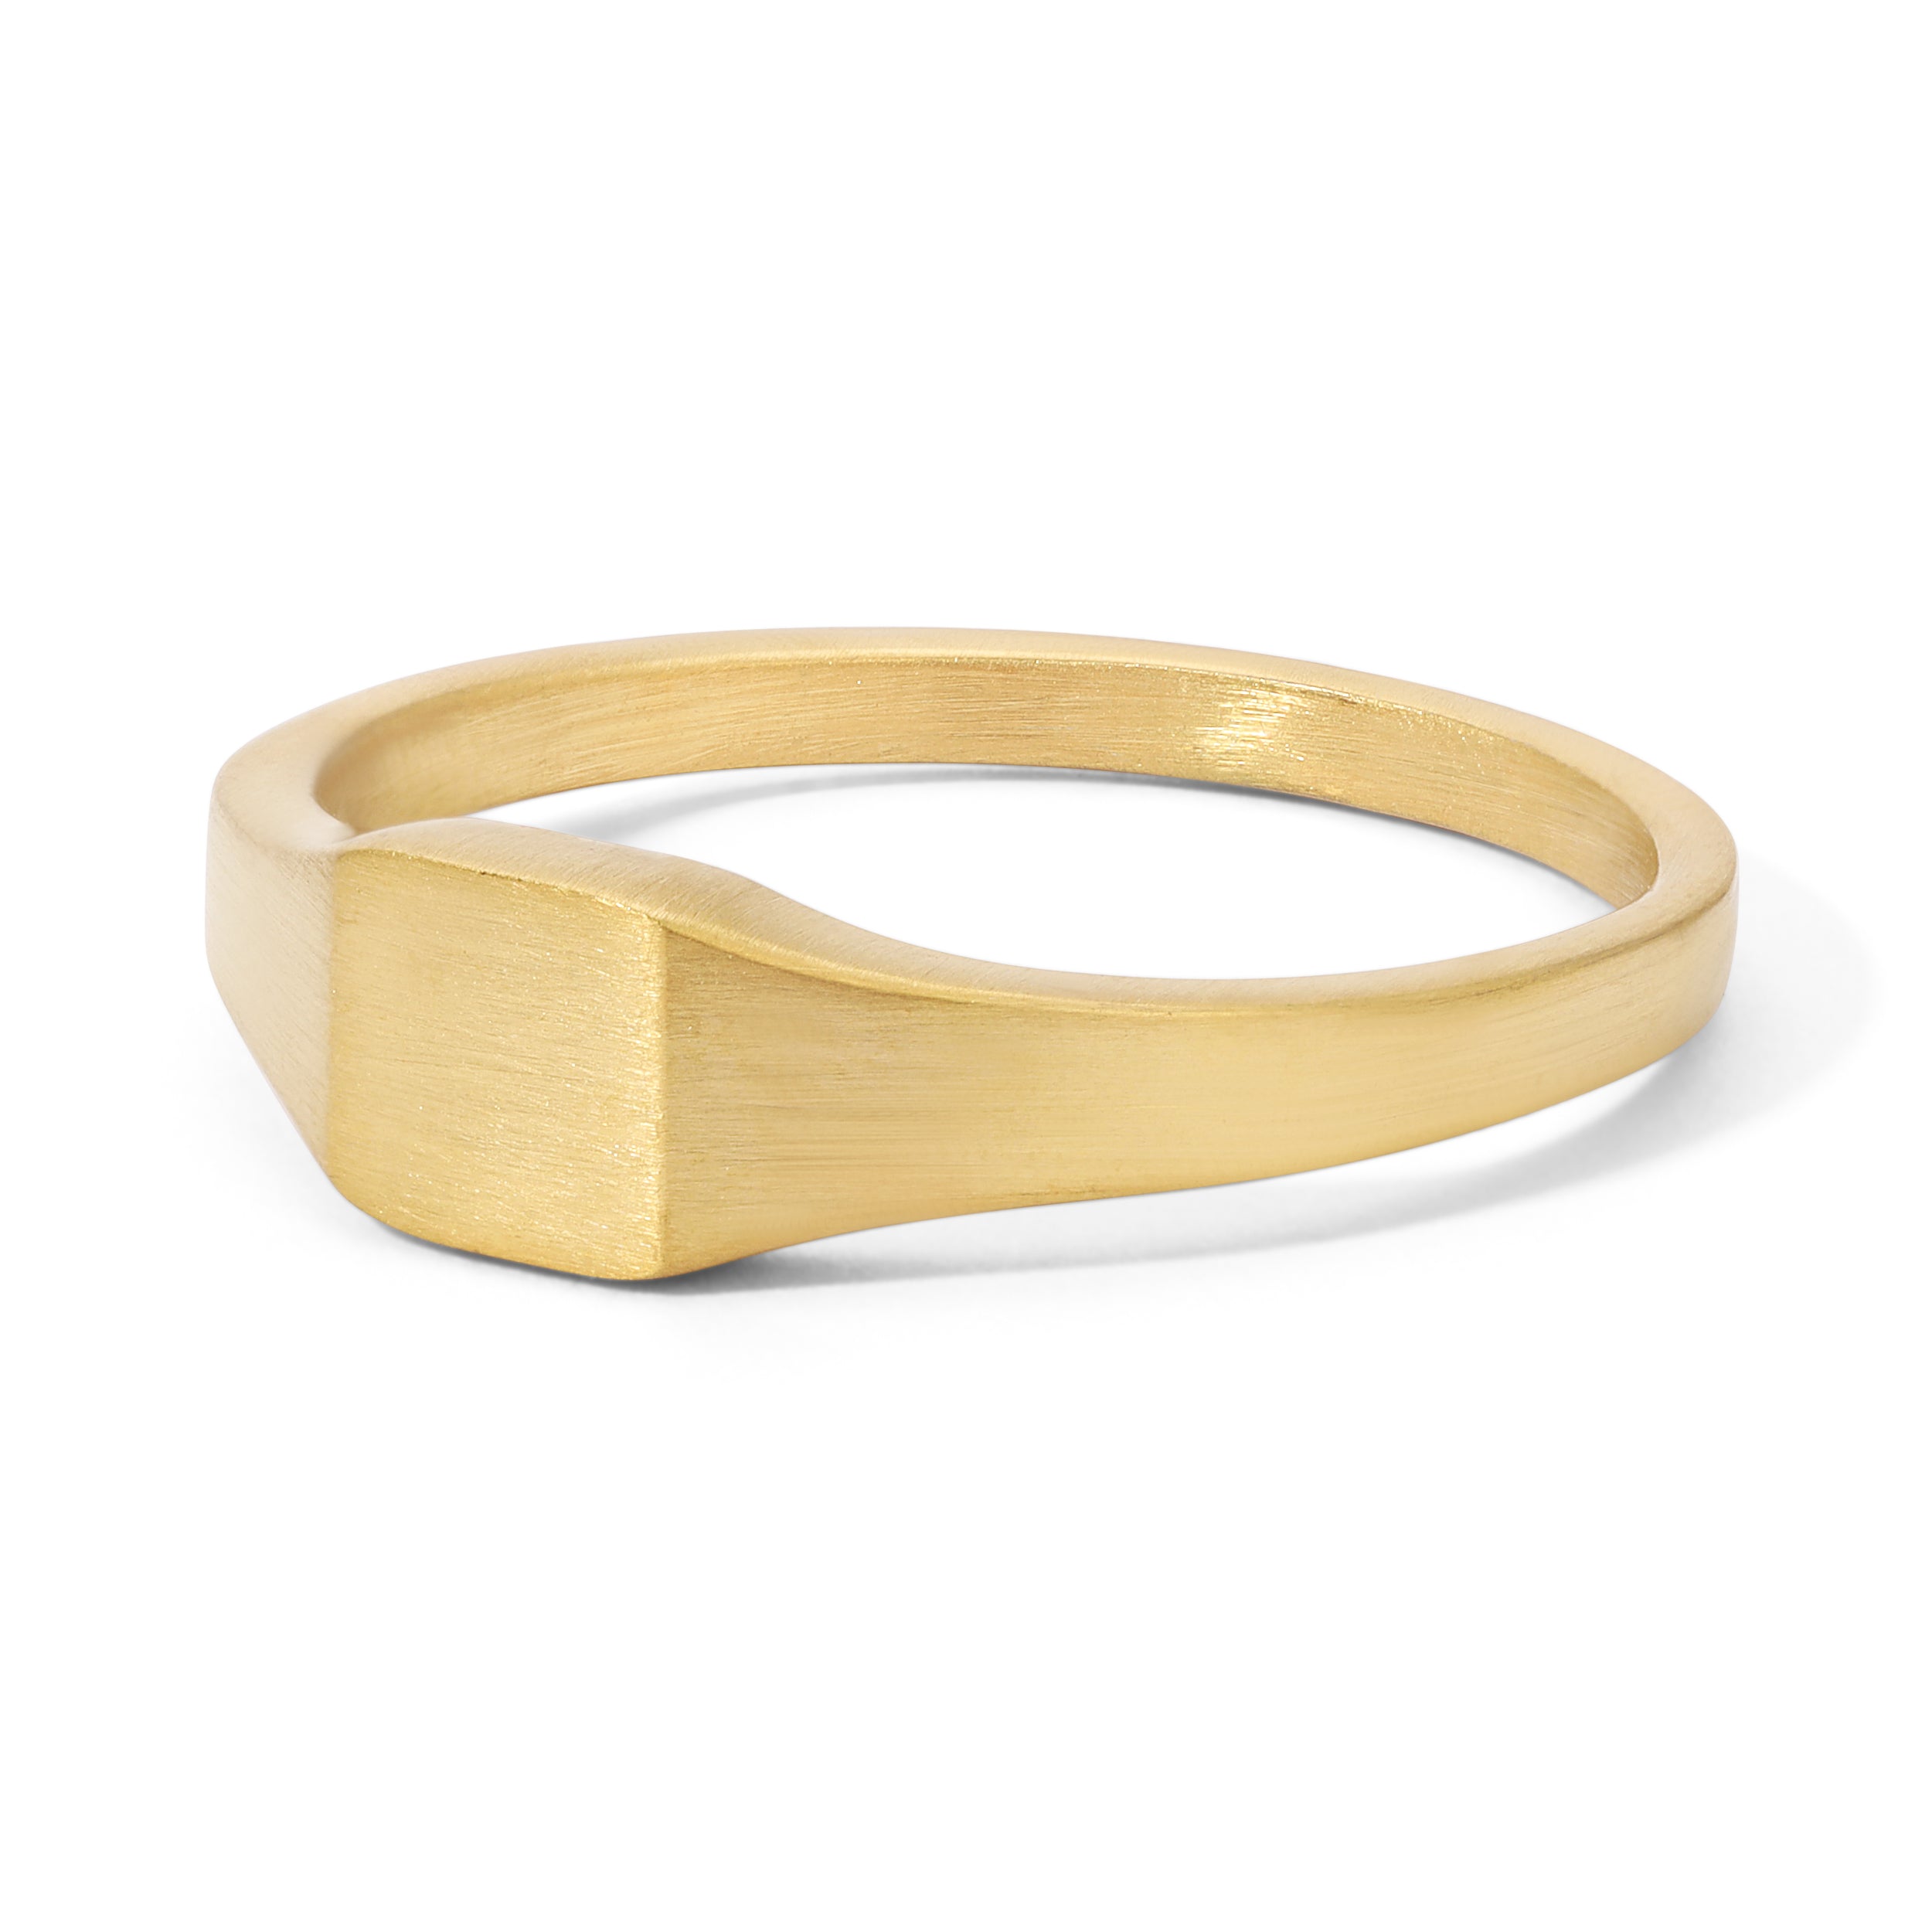 Stainless Steel Square Signet Ring